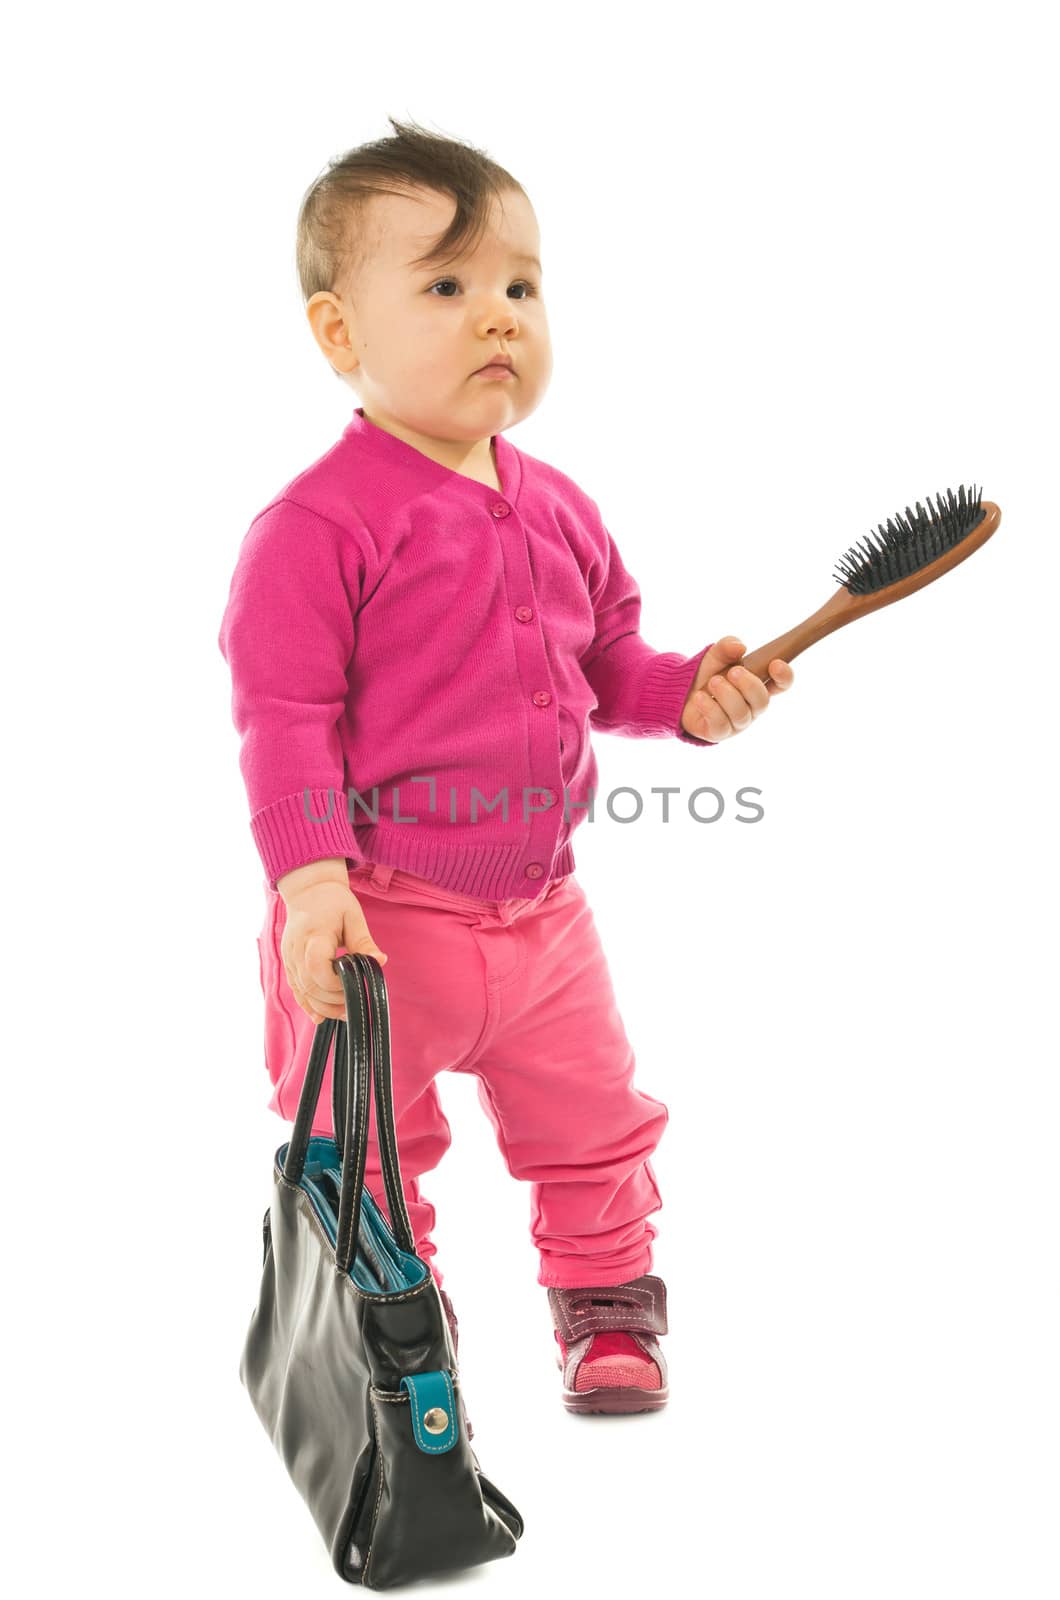 Baby girl with comb